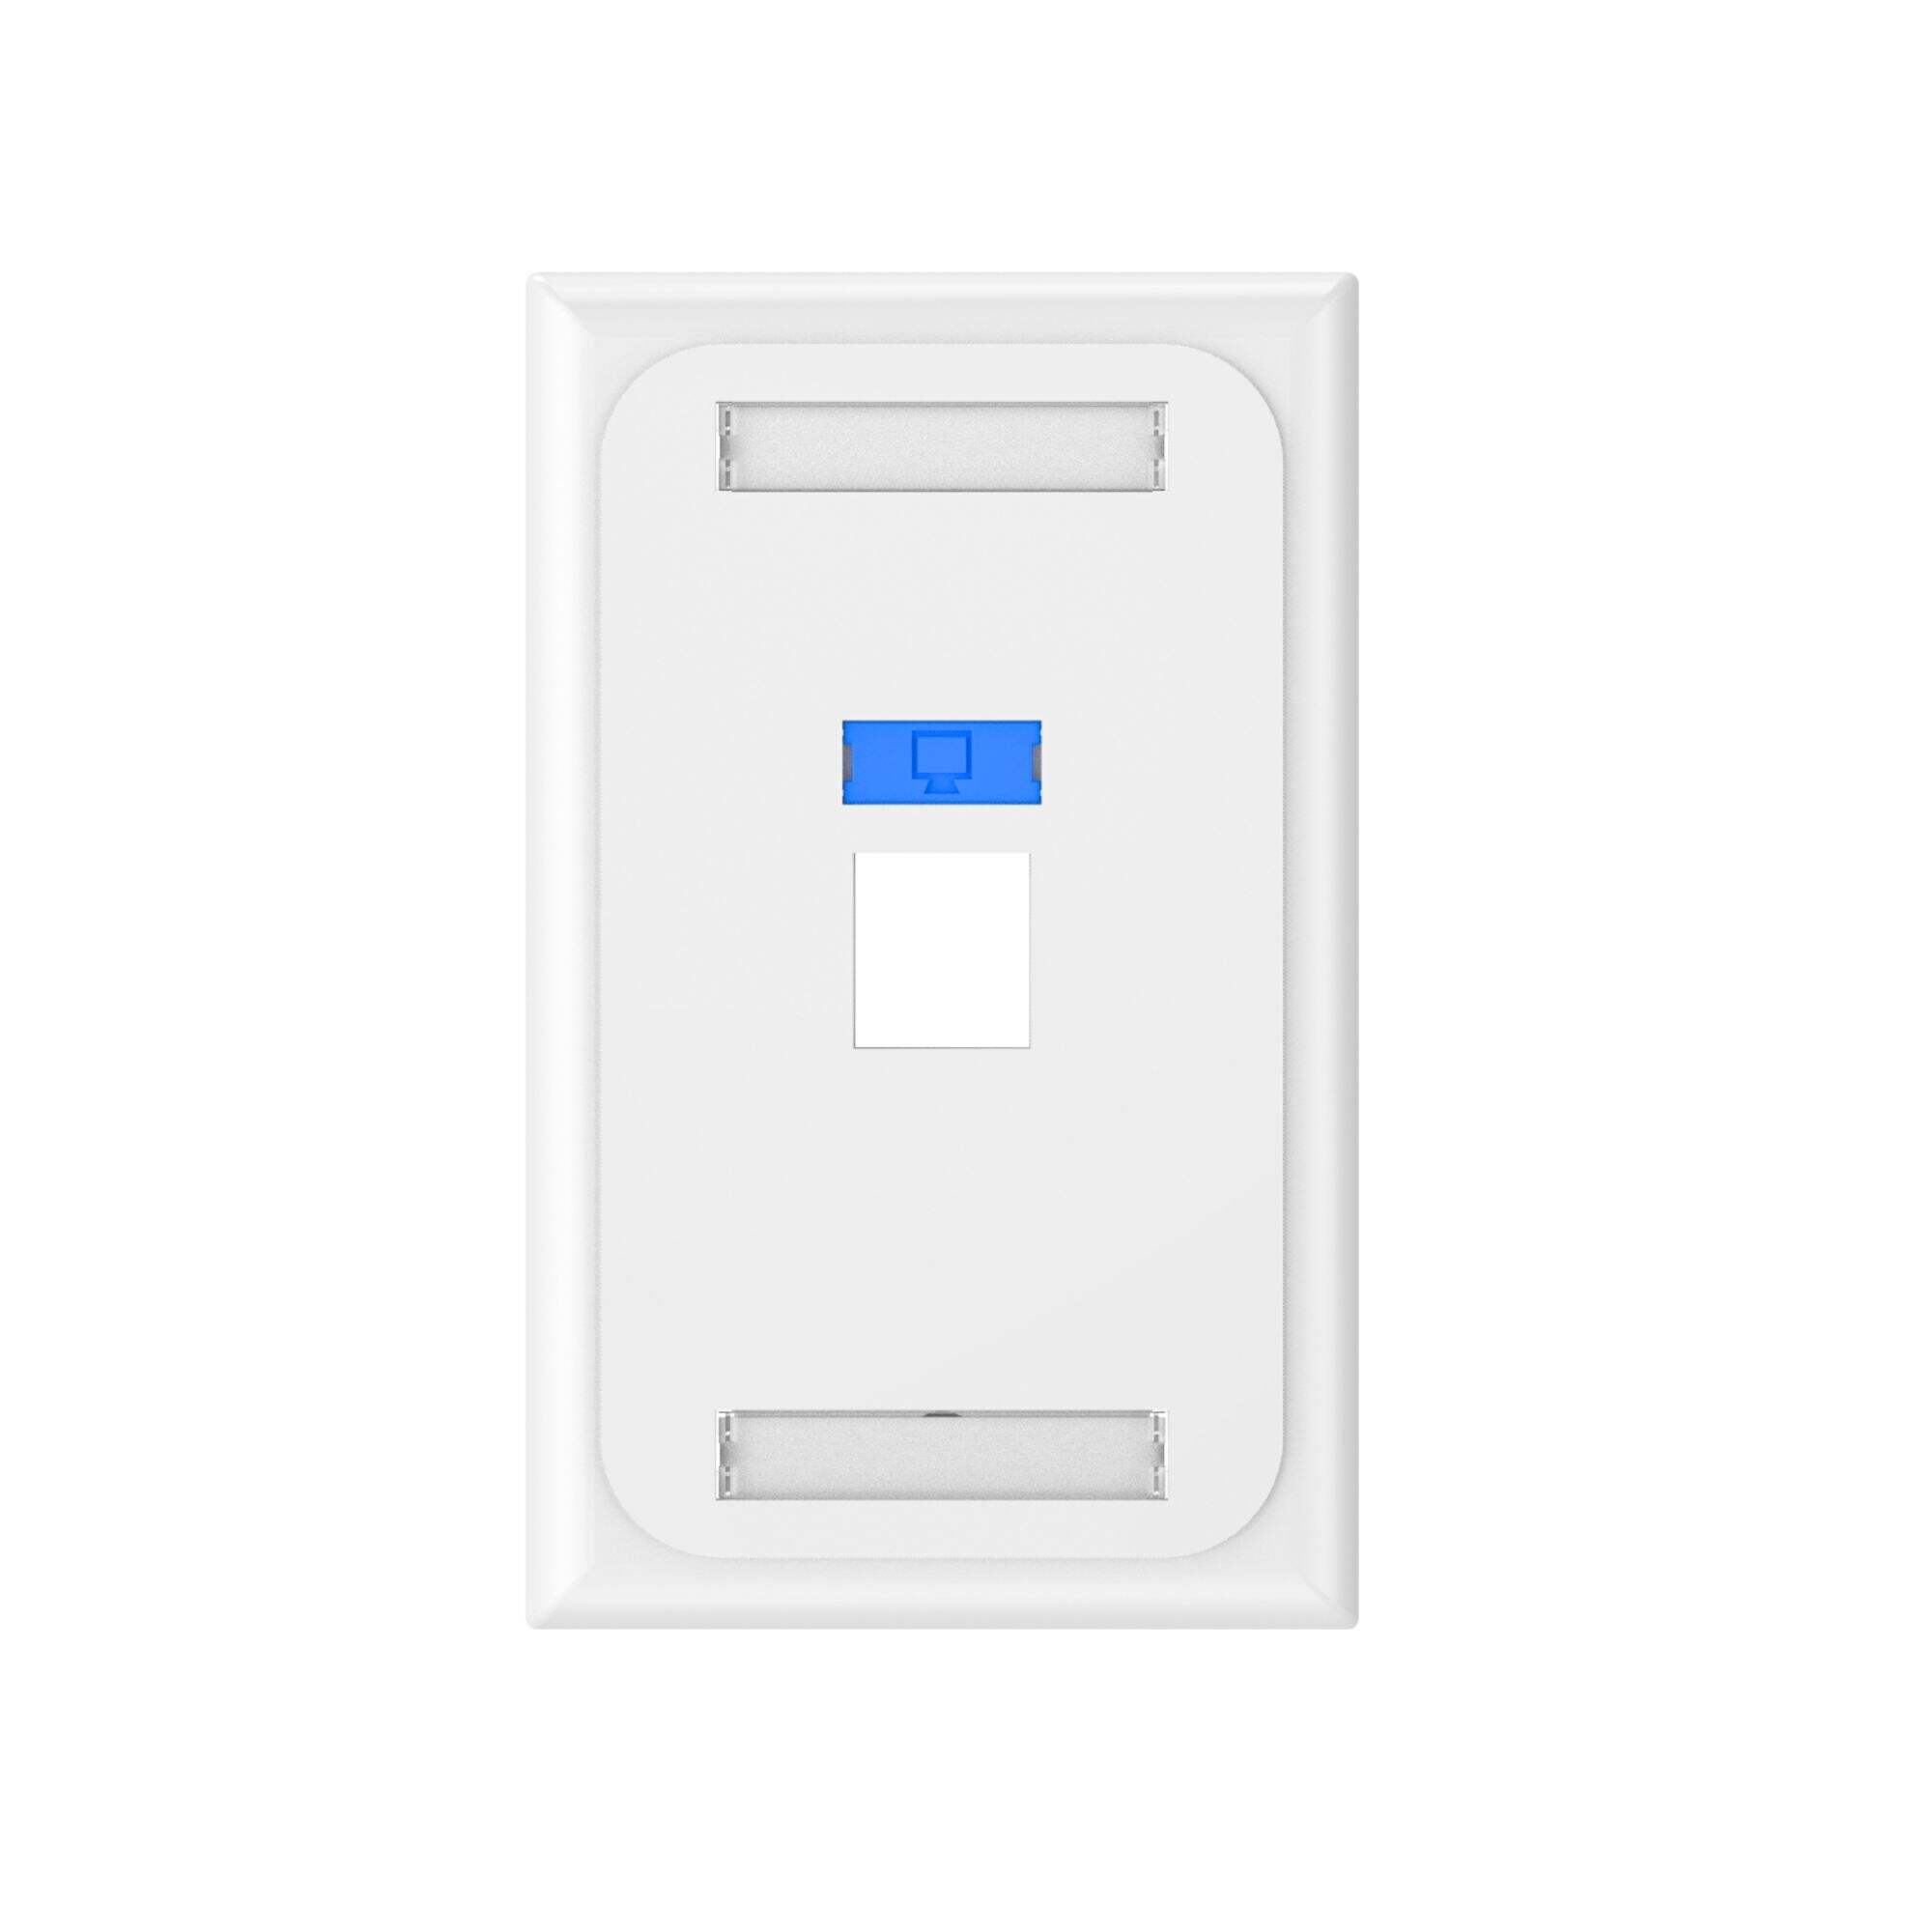 120 type cover shell Faceplate Rj45 RJ11 keystone Face Plate ps5 1/2/3/4/6 Port Socket Network Wall Faceplate